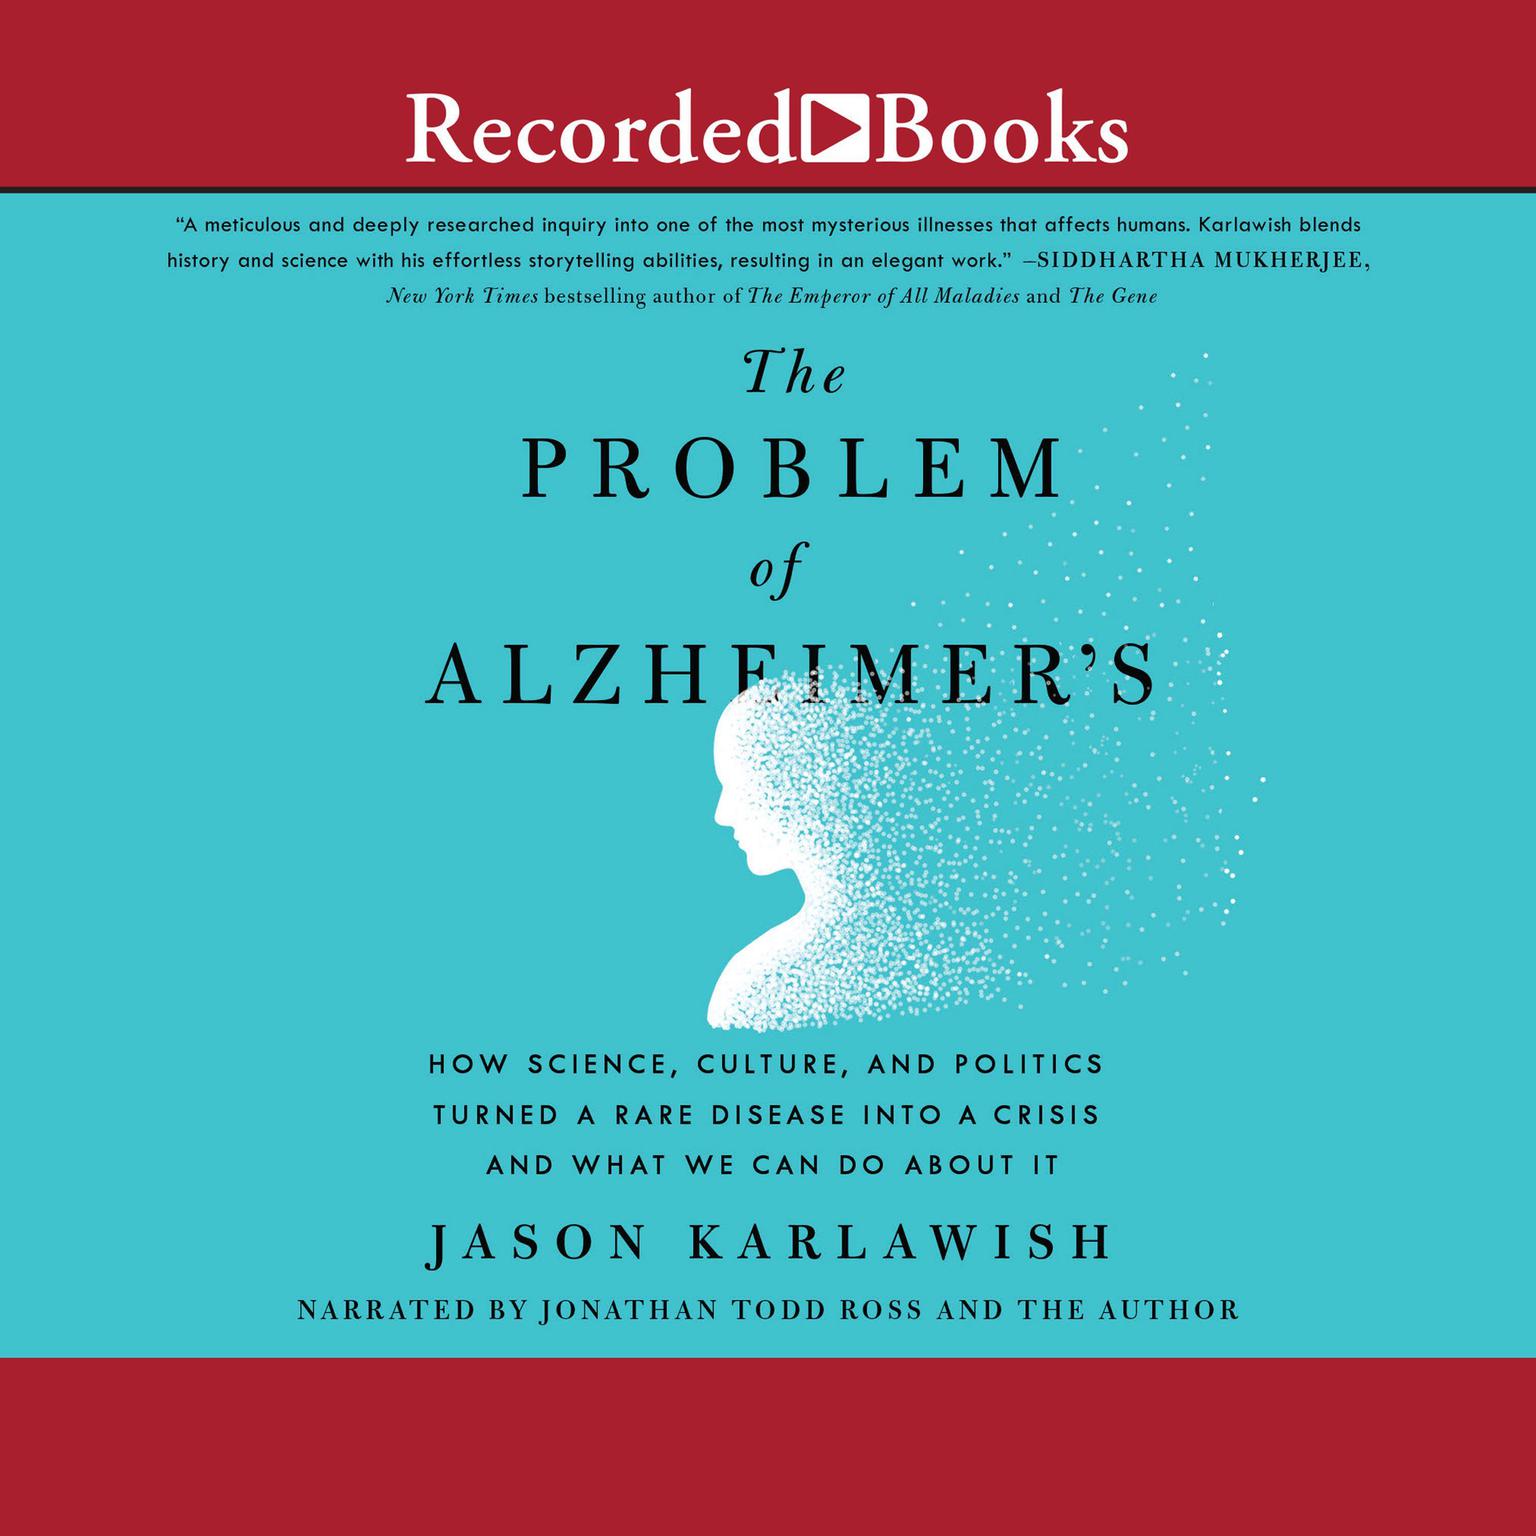 The Problem of Alzheimers: How Science, Culture, and Politics Turned a Rare Disease into a Crisis and What We Can Do About It Audiobook, by Jason Karlawish